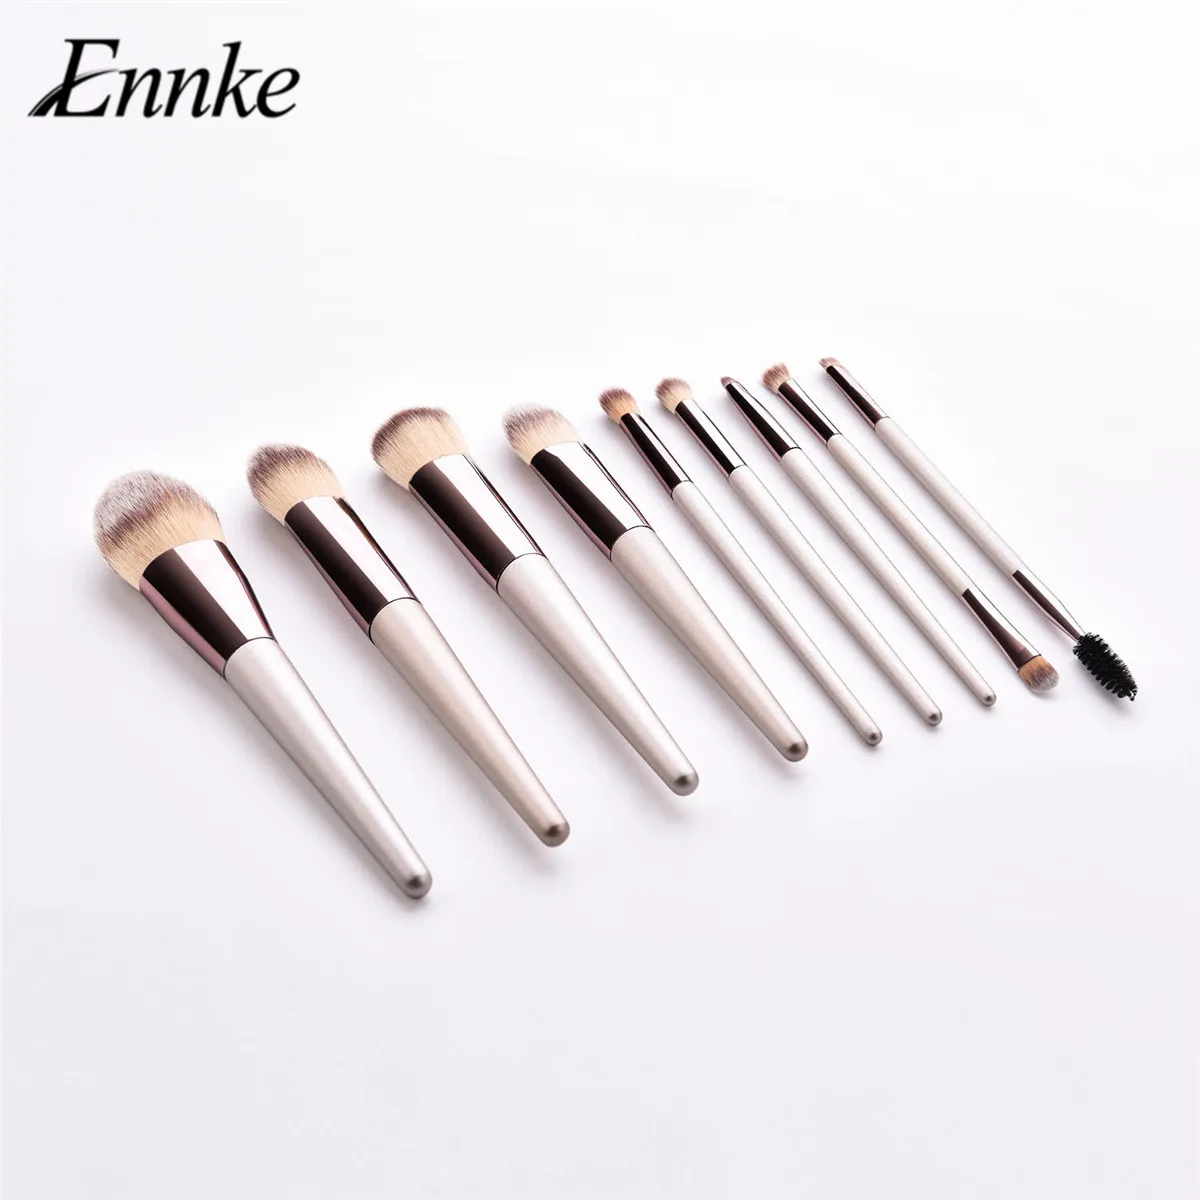 ENNKE Makeup Brushes Champagne Gold 9 Pcs/Lot Eyelash/Eyebrow Double Head Eye Beauty Brushes Highlight Concealer Cosmetic Tools